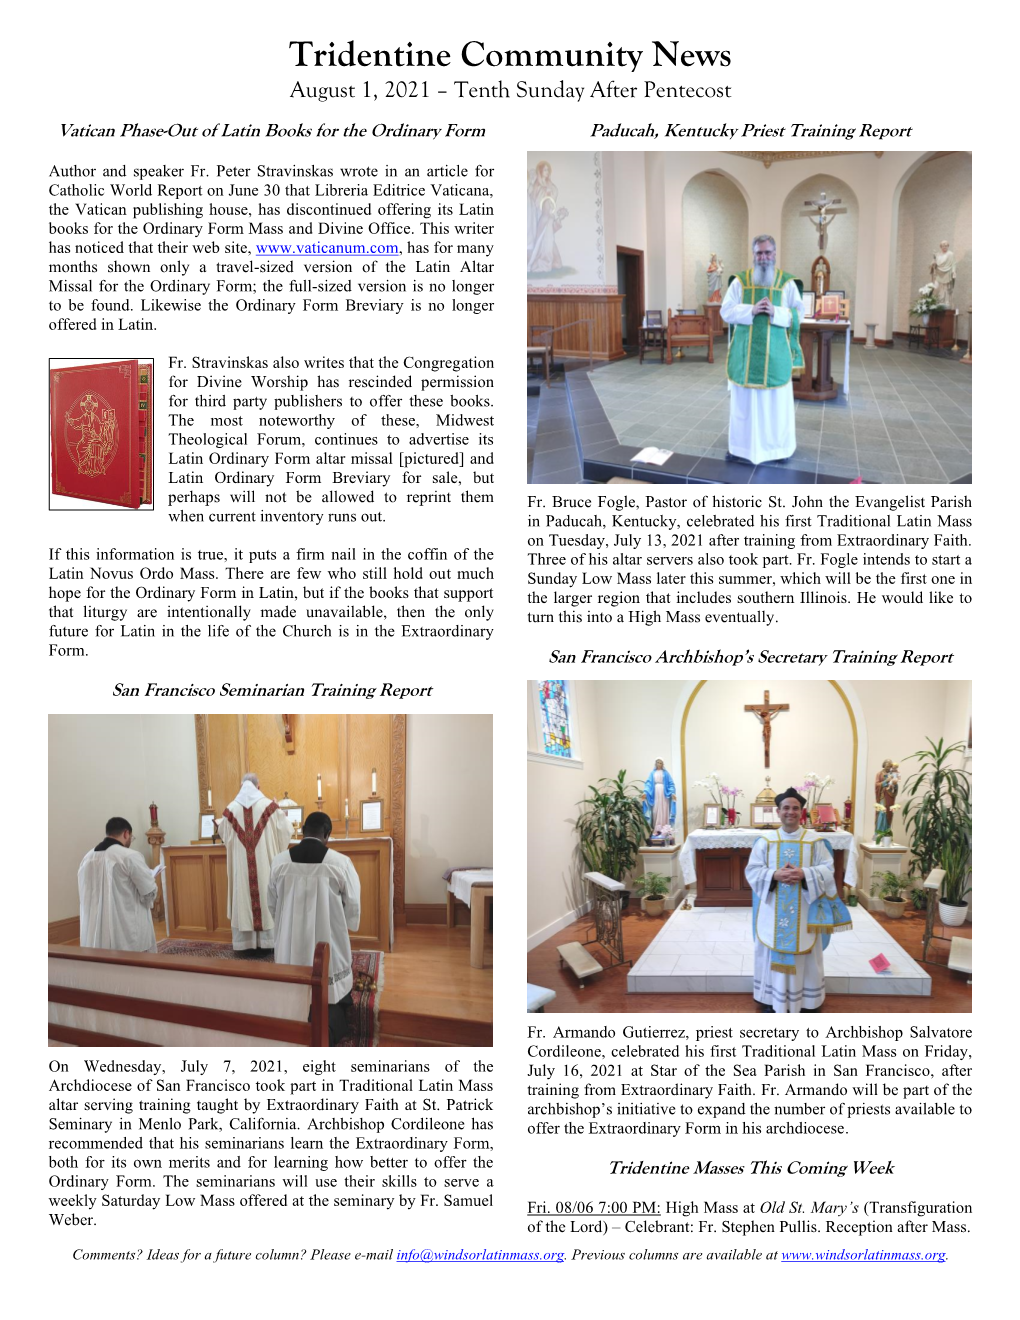 Vatican Phase-Out of Latin Books for the Ordinary Form Paducah, Kentucky Priest Training Report